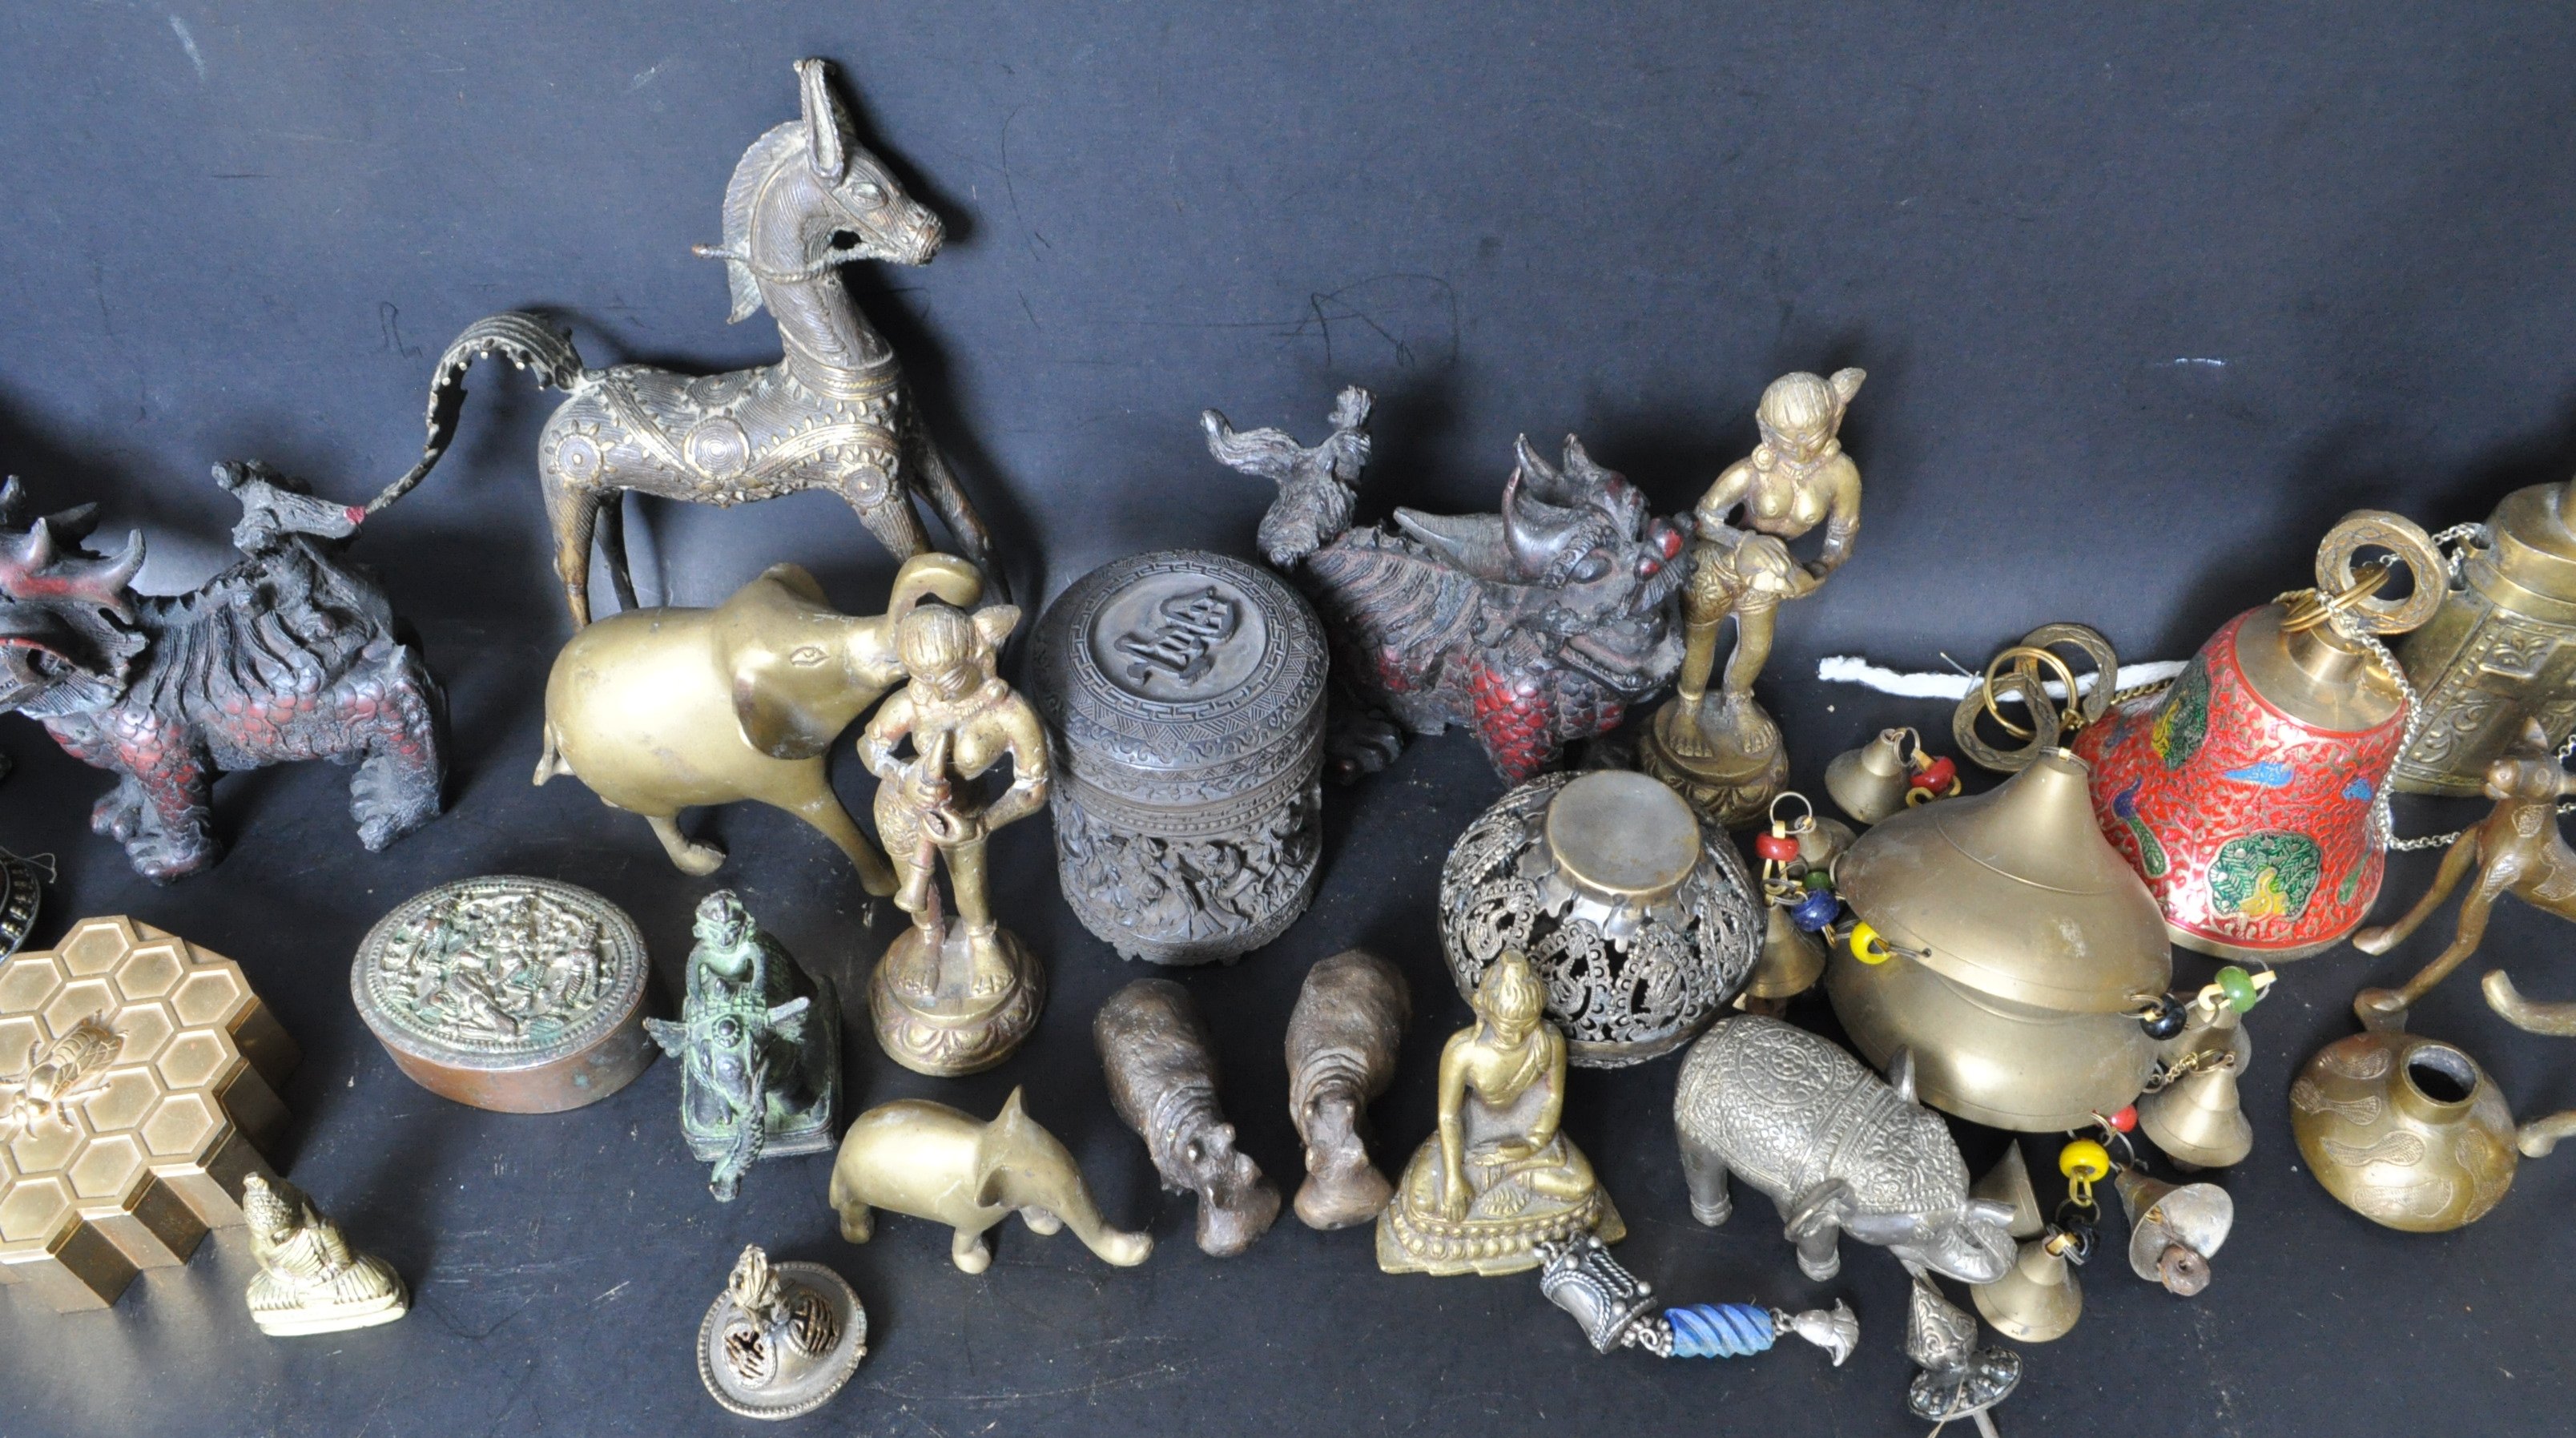 LARGE COLLECTION OF BRASS WARE AND HINDU FIGURINES - Image 6 of 9